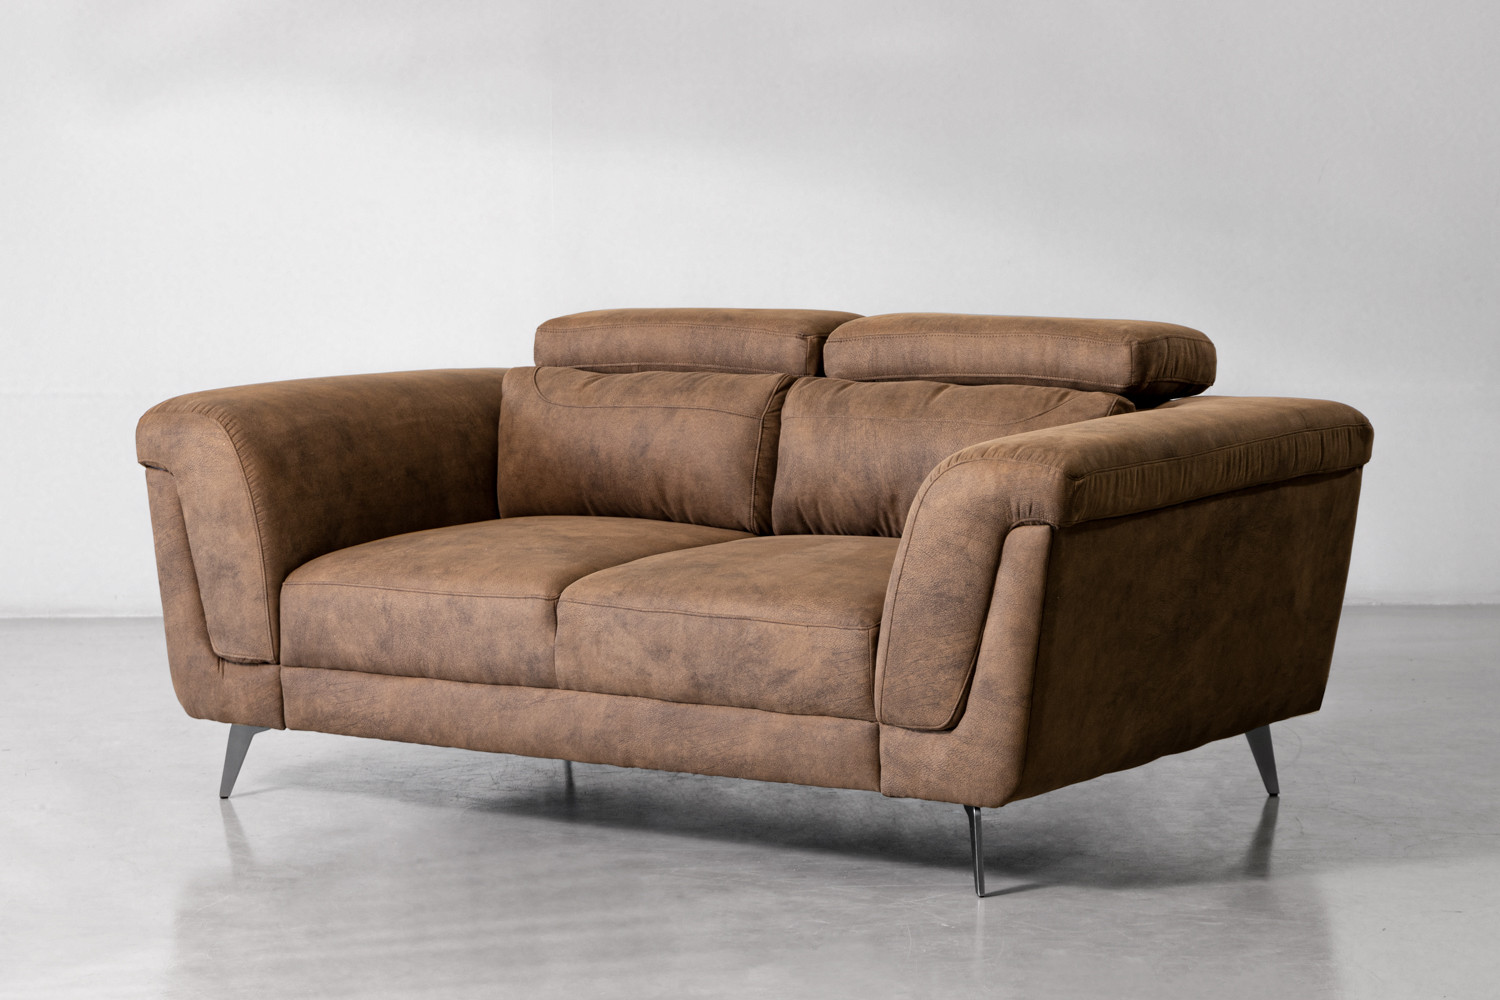 Laurence 2 Seater Couch - Mocha 2 Seater Fabric Couches - 4